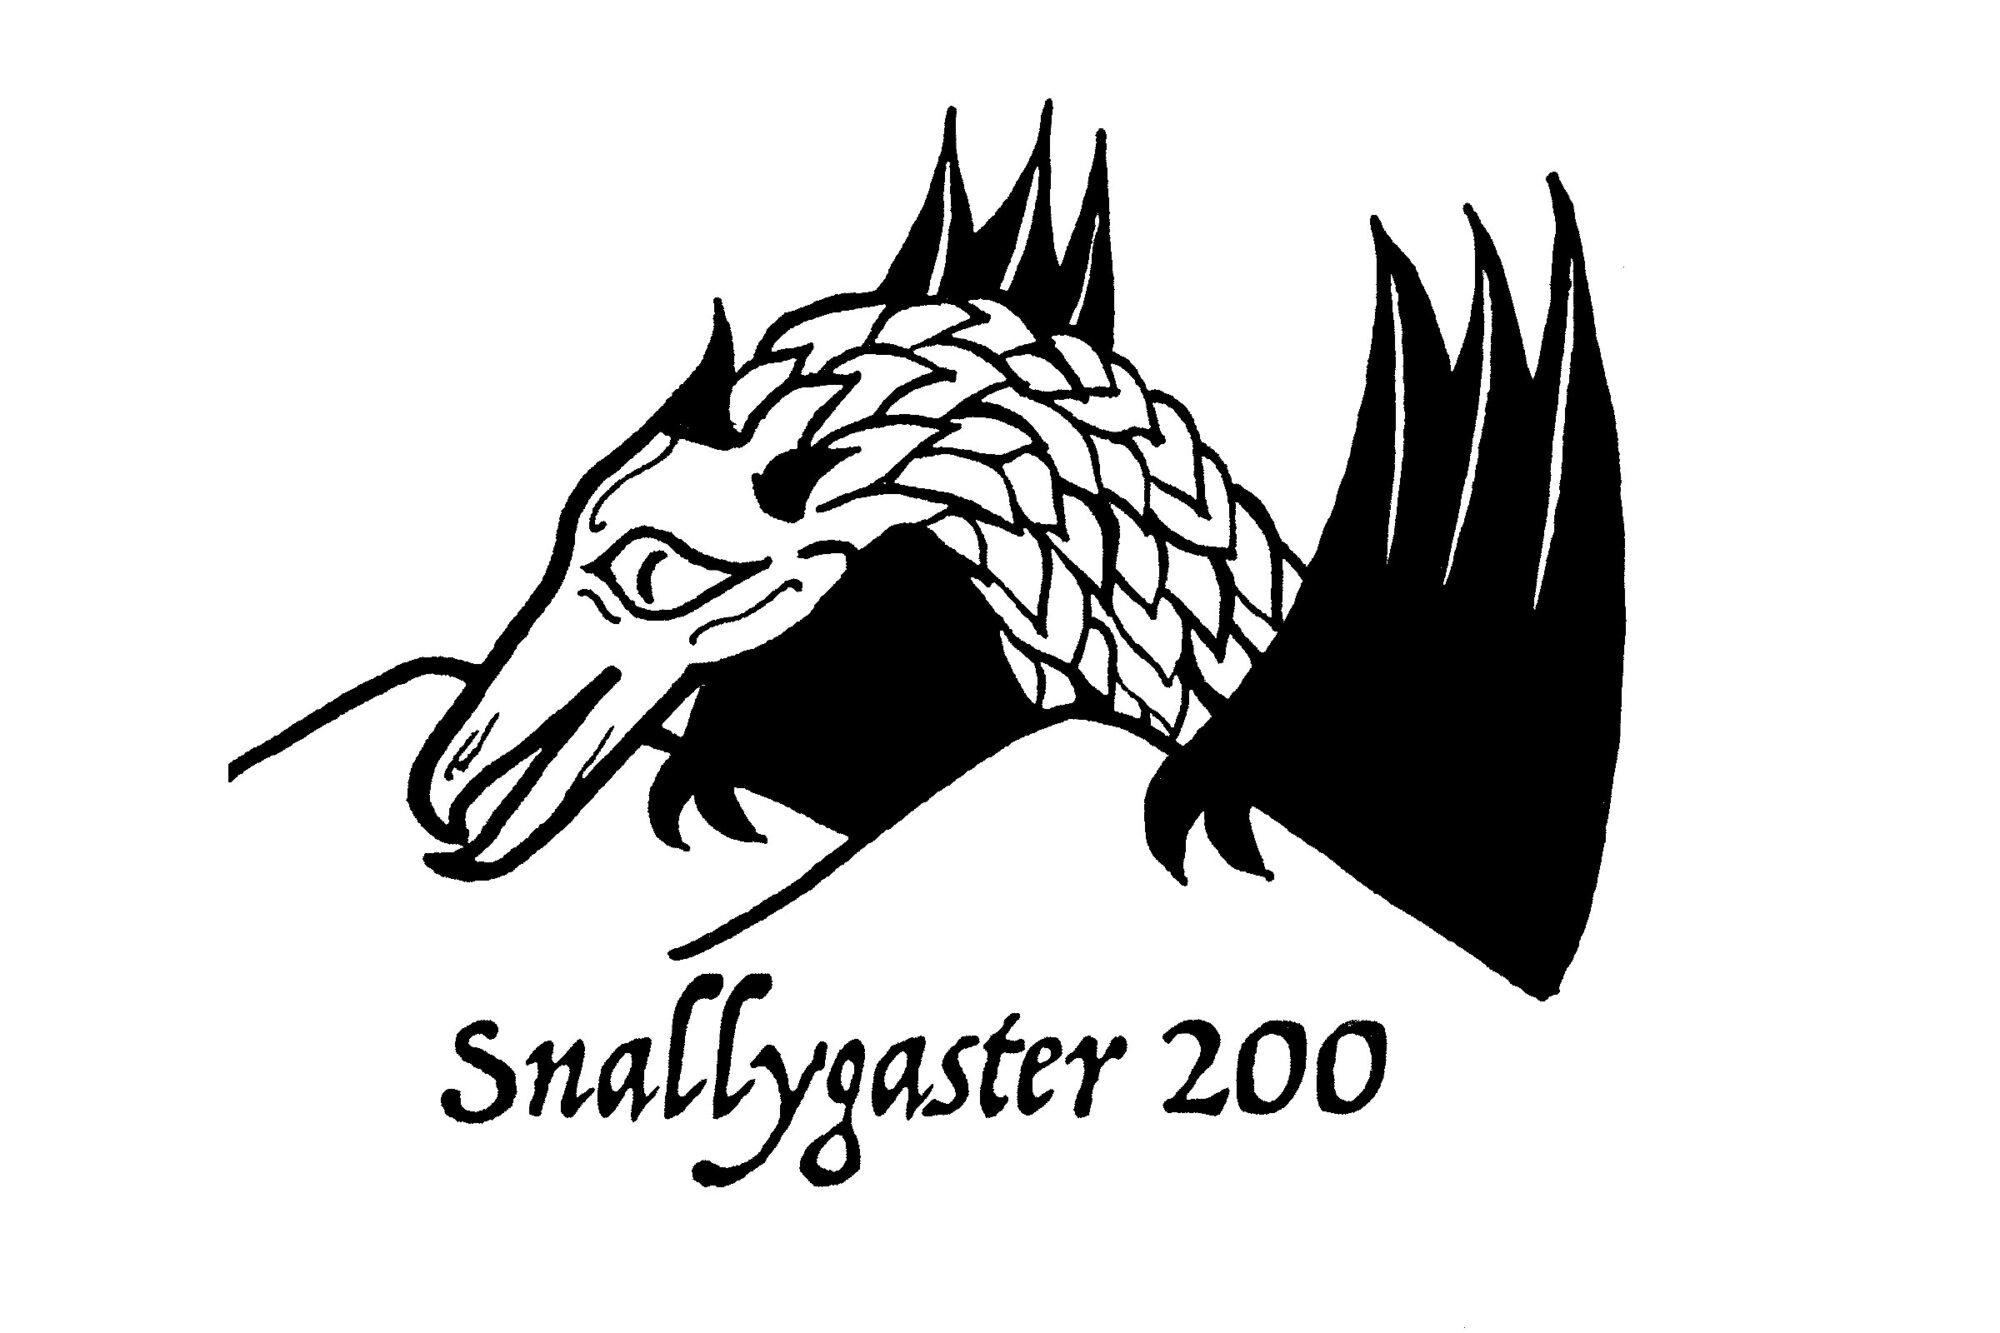 The Snallygaster 200